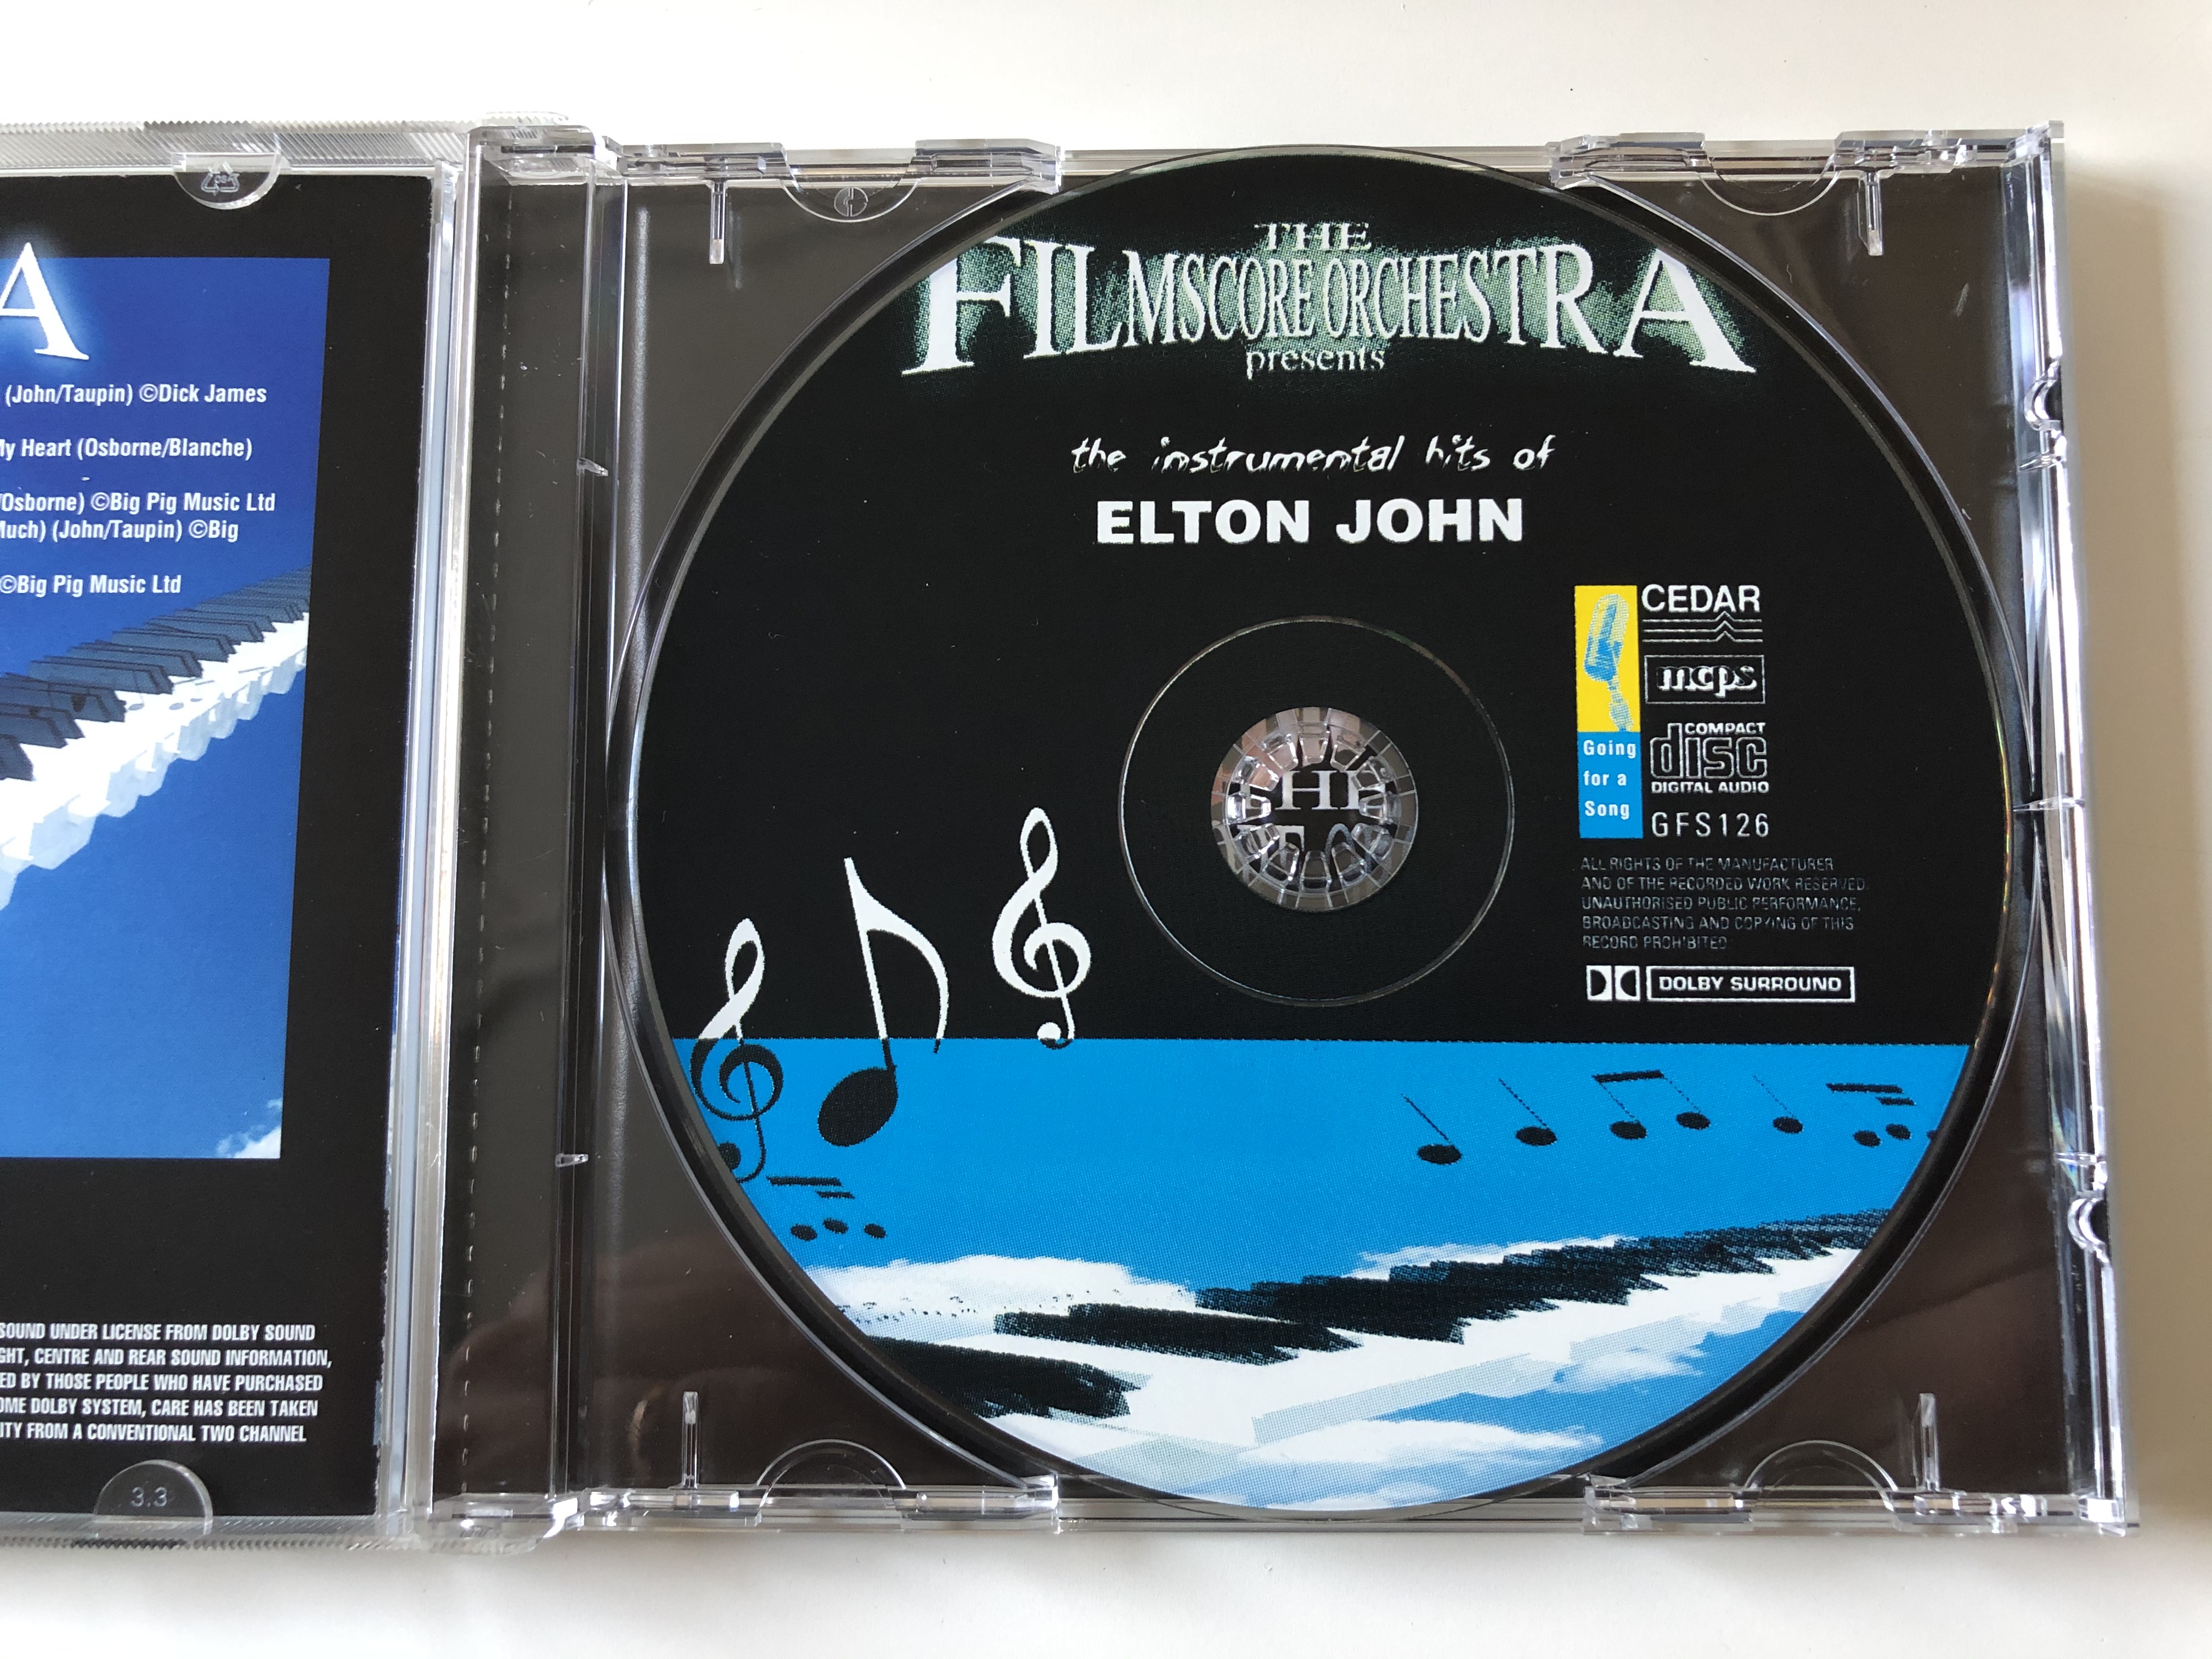 the-film-score-orchestra-presents-the-instrumental-hits-of-elton-john-including-candle-in-the-wind-song-for-guy-rocket-man-daniel-and-many-more-going-for-a-song-audio-cd-gfs126-3-.jpg